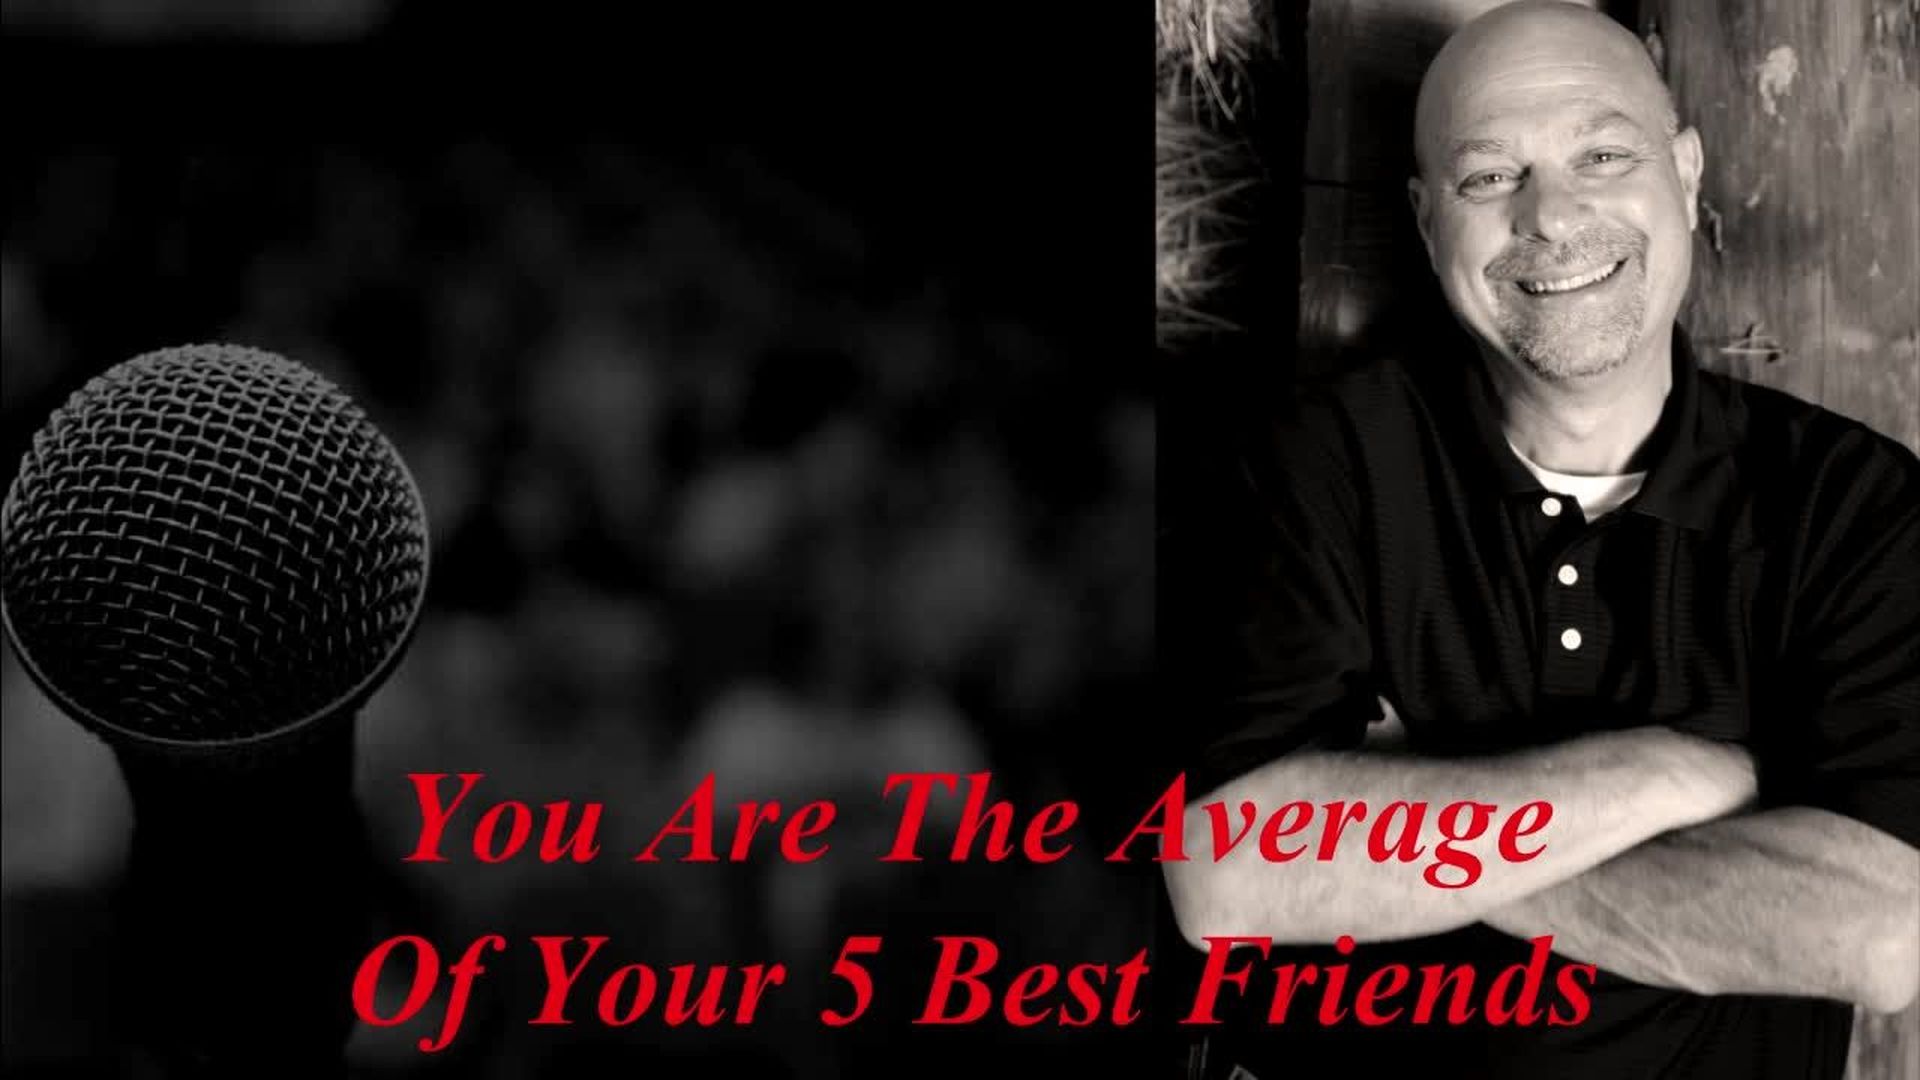 You are the average of your 5 best friends